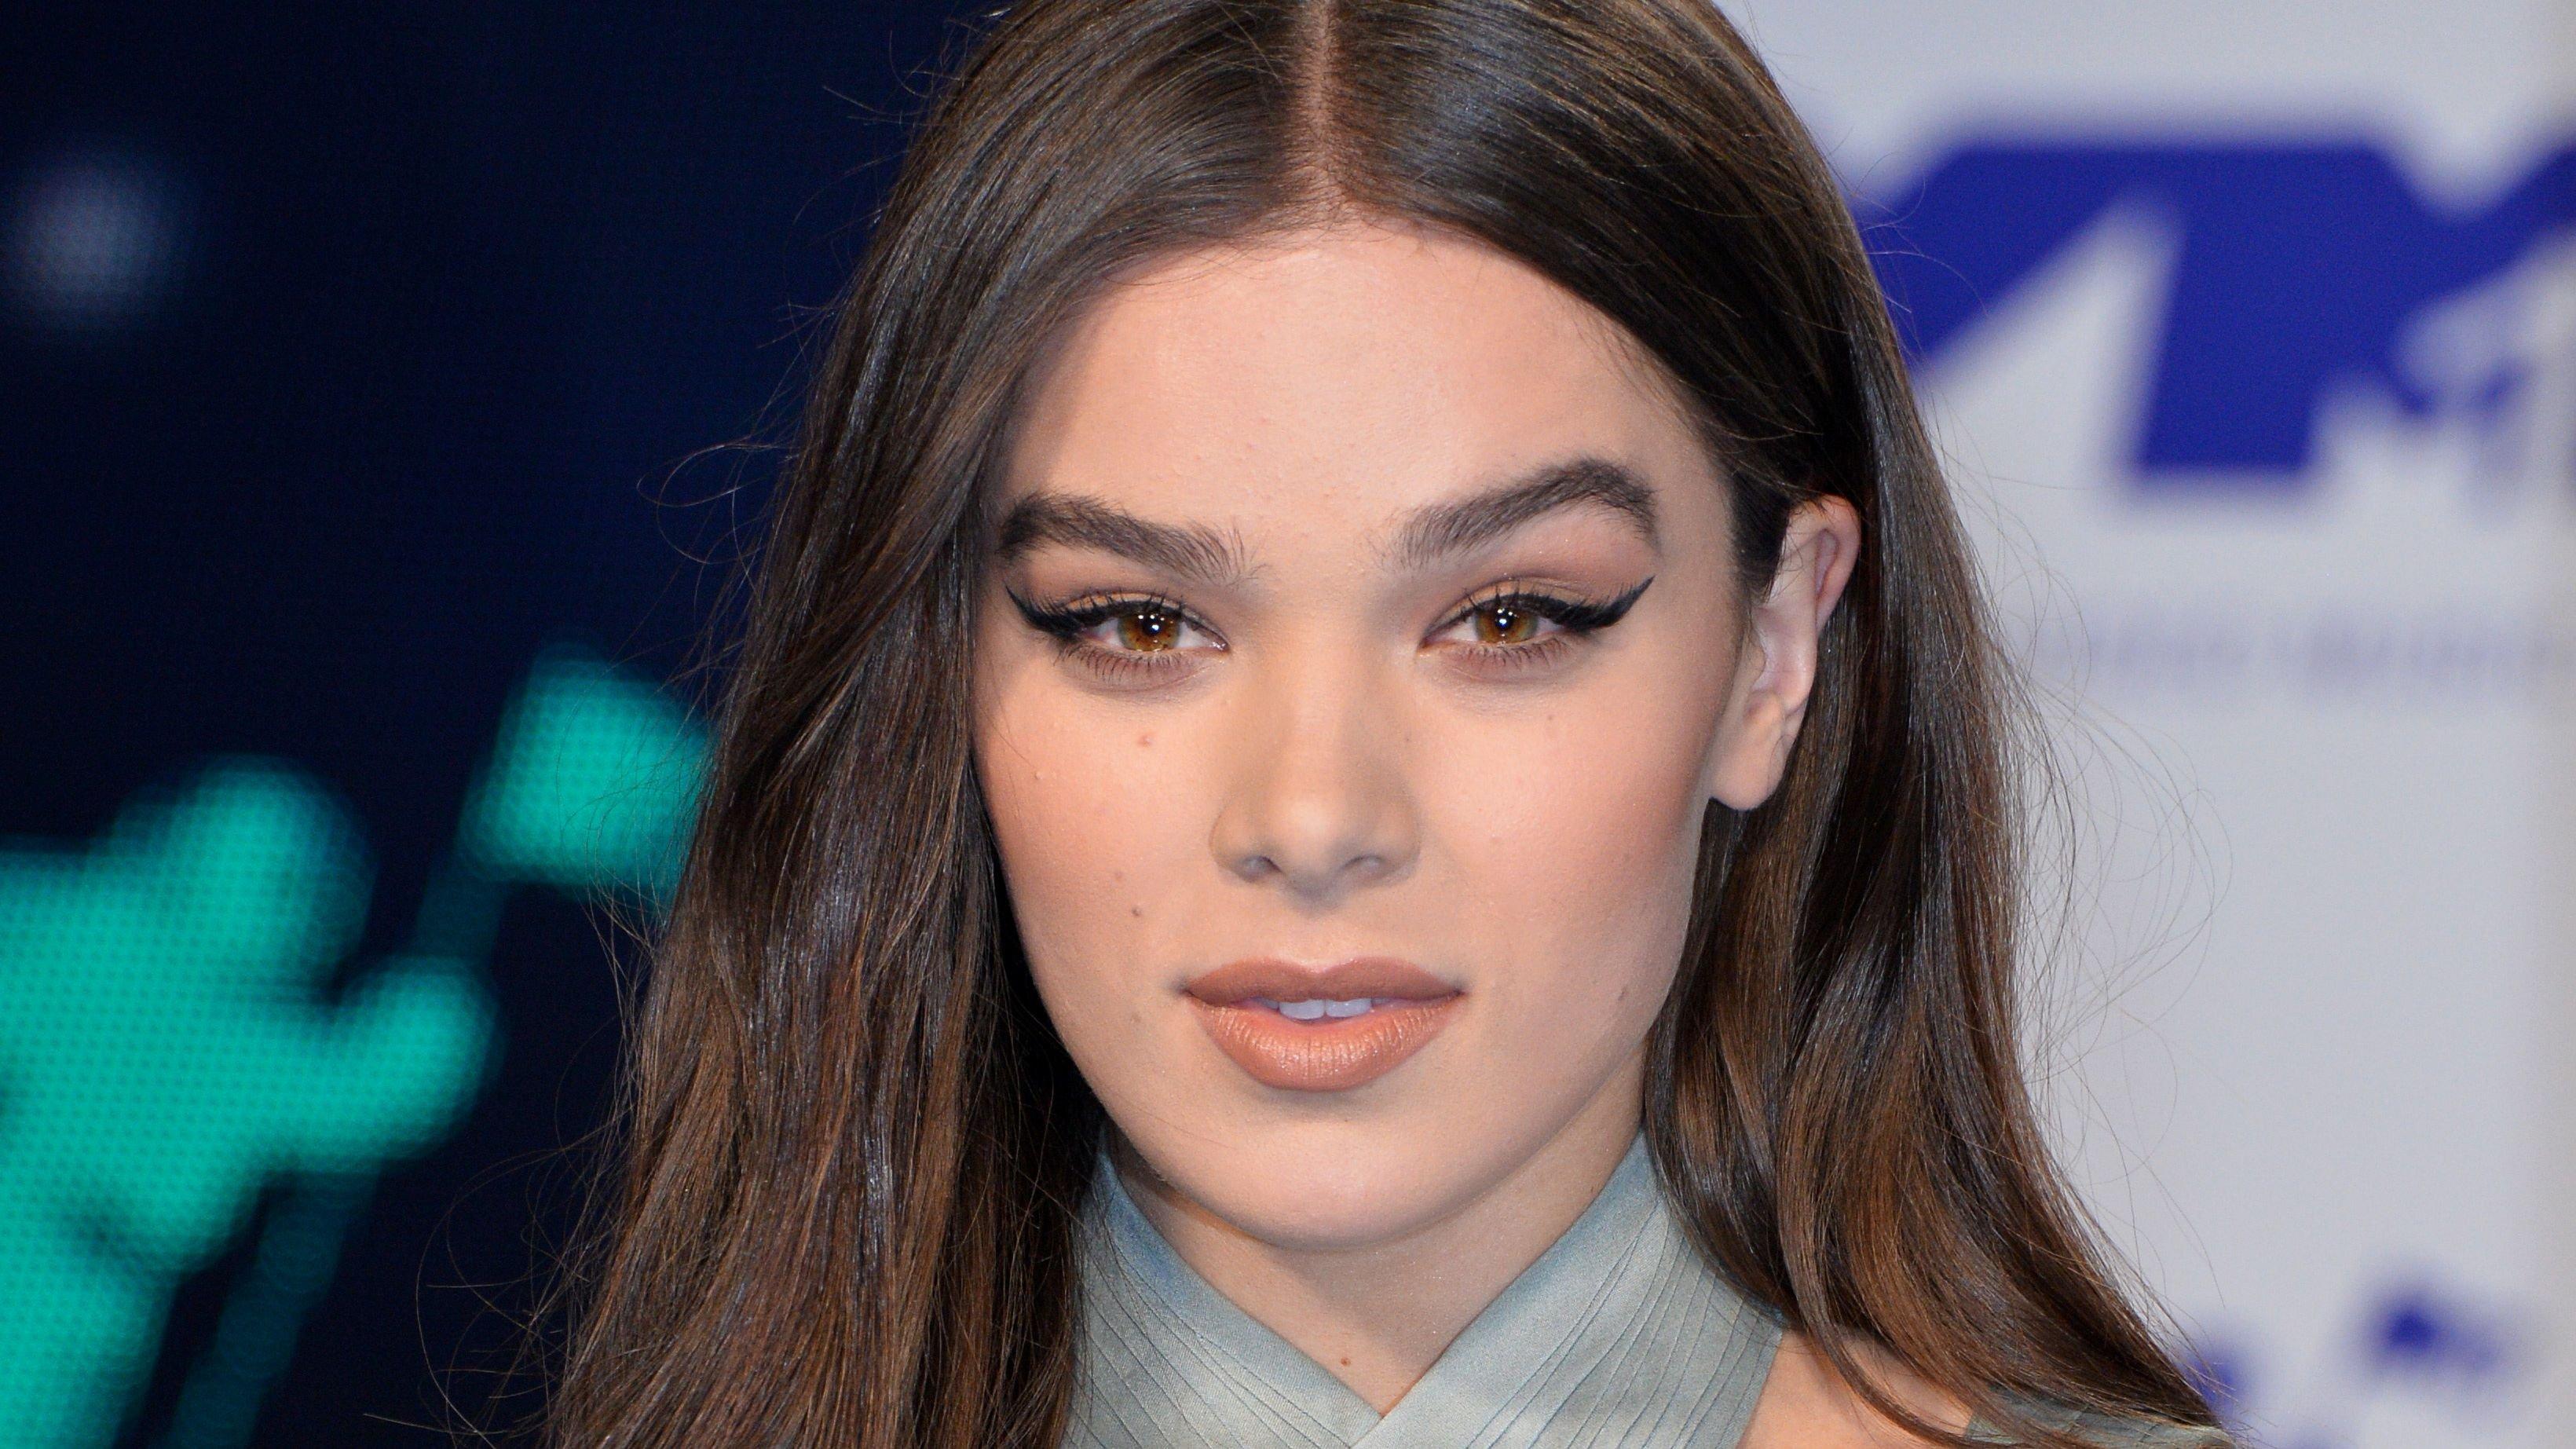 Hailee Steinfeld in strappy gray top with winged eyeliner.